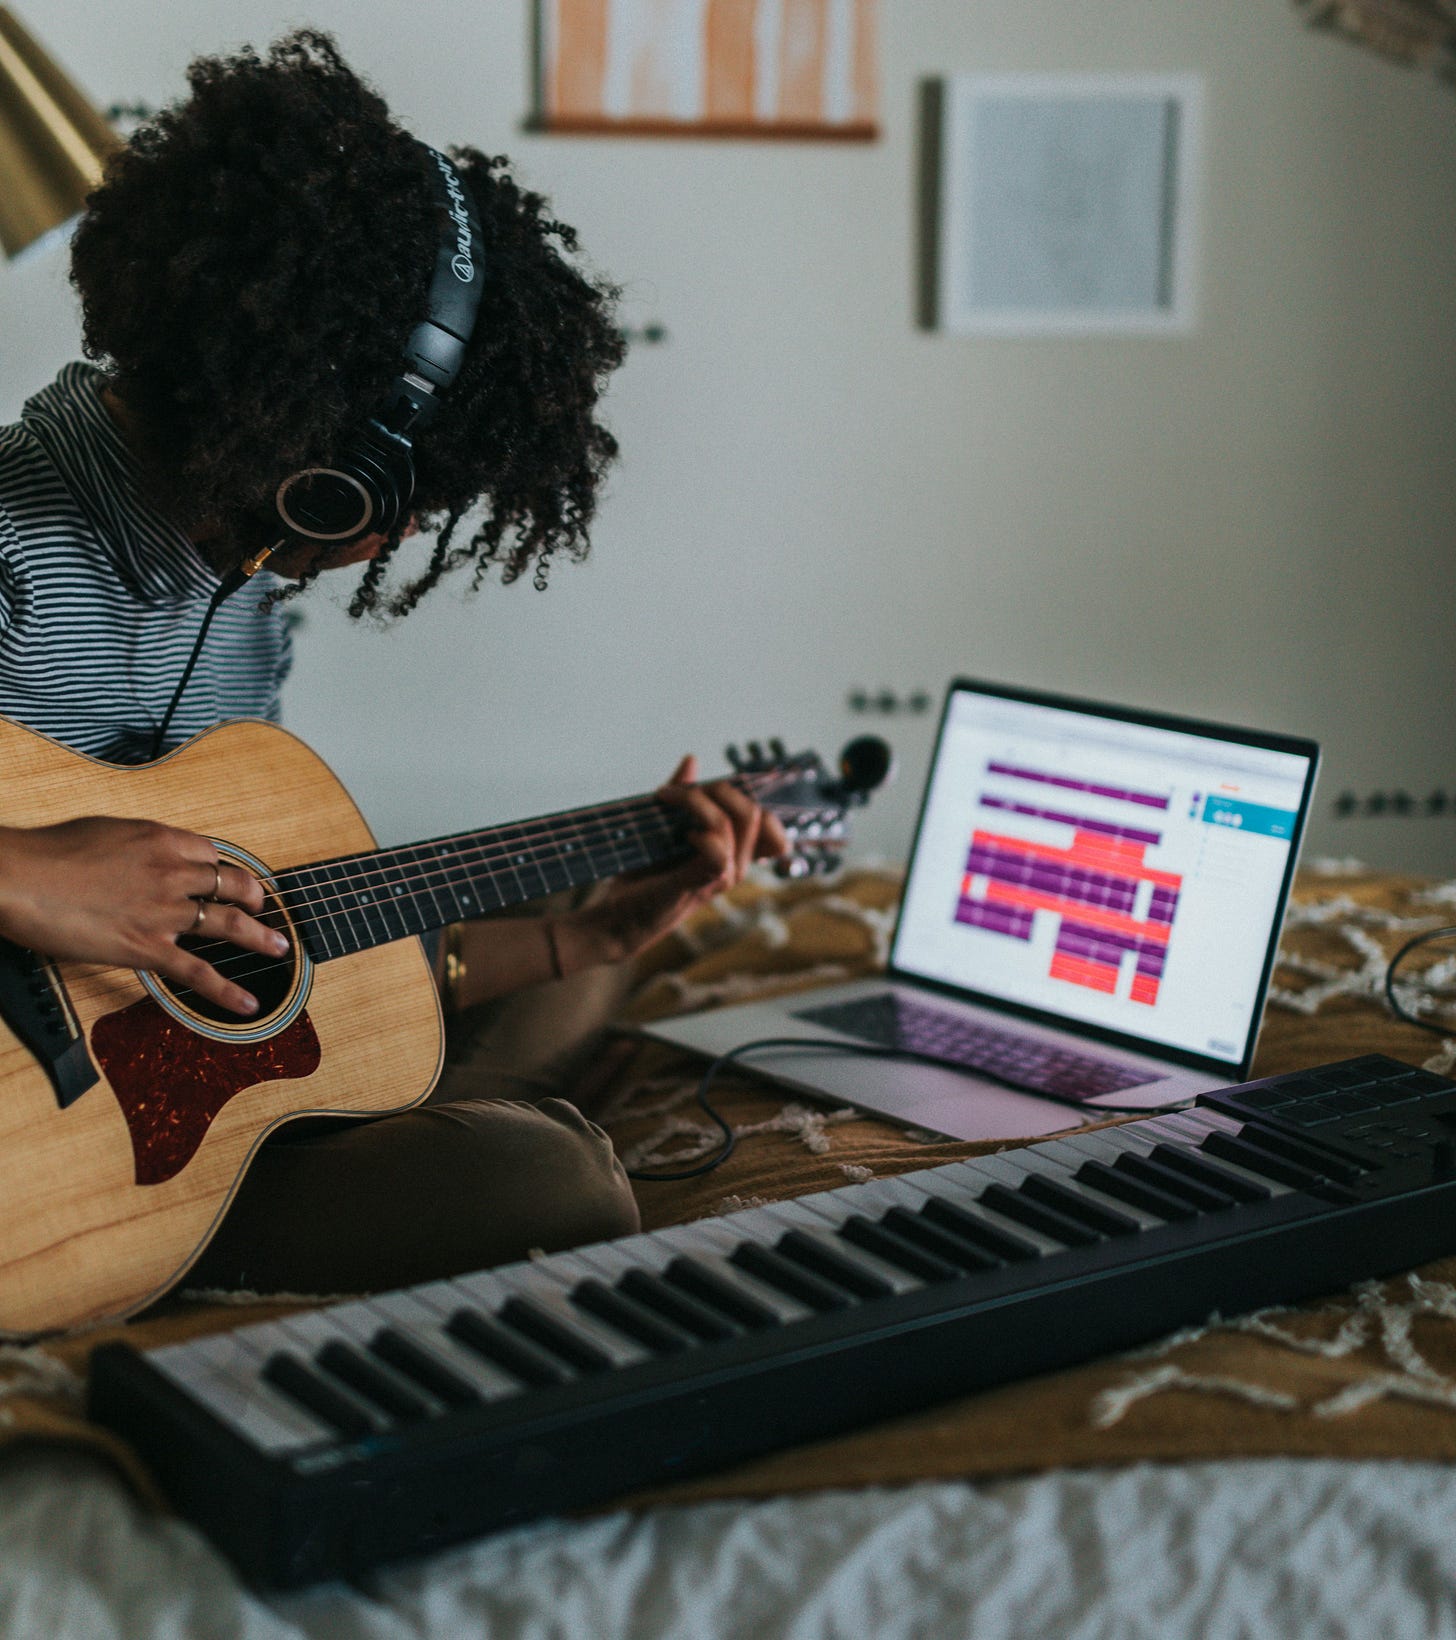 Black woman sitting on a bed wearing headphones, playing a guitar, looking at music on a computer, with a music keyboard nearby